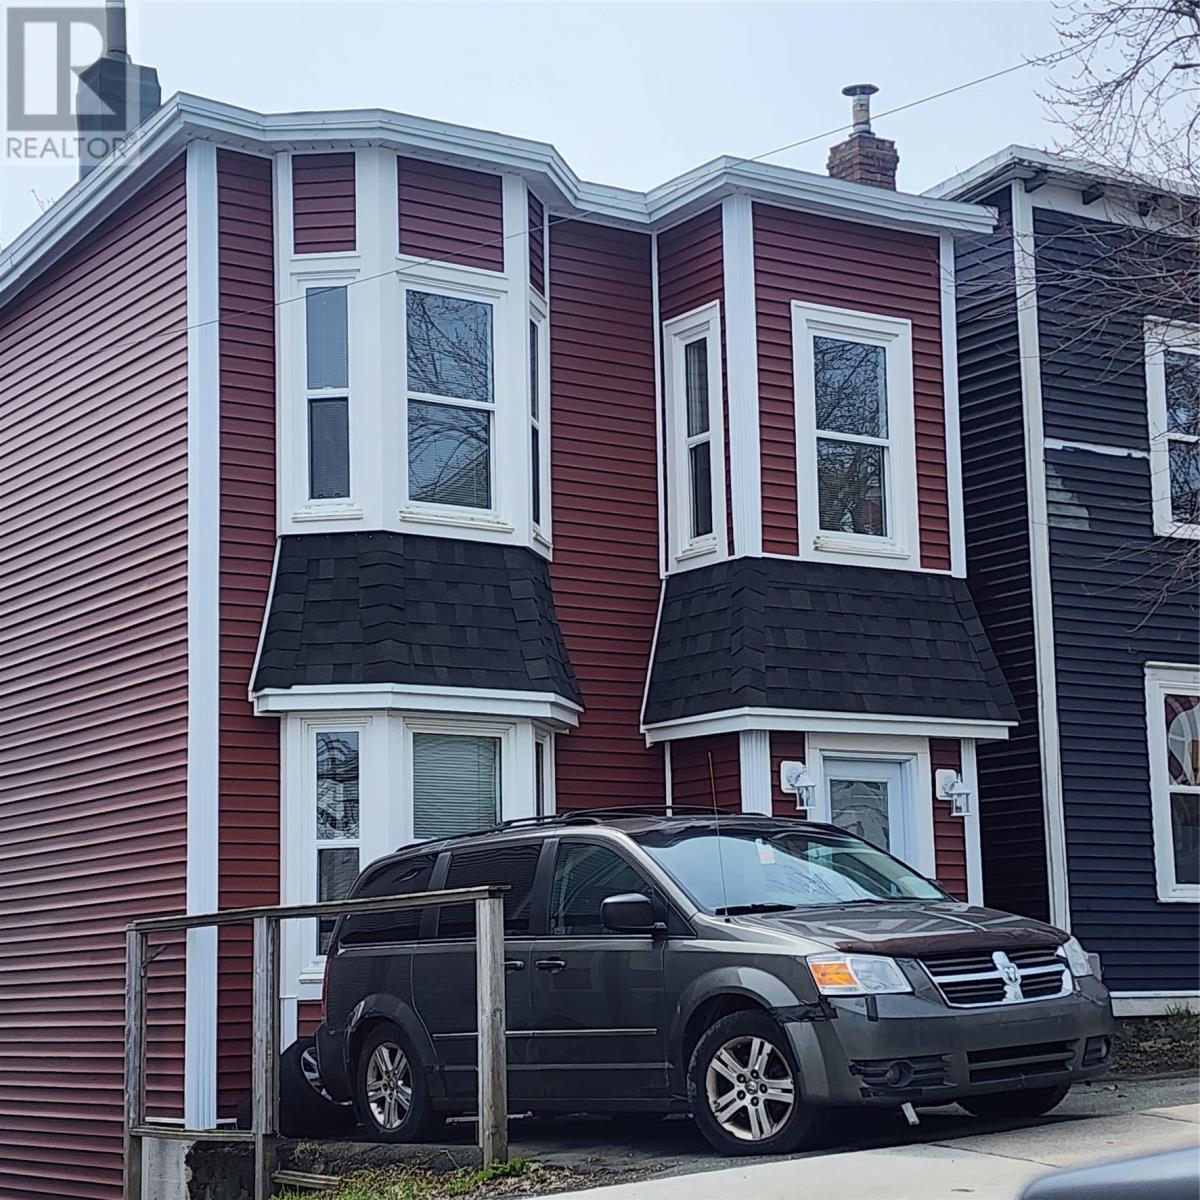 43 Prince of Wales Street, St. John's, A1C4N1, 3 Bedrooms Bedrooms, ,1 BathroomBathrooms,Single Family,For rent,Prince of Wales,1270090